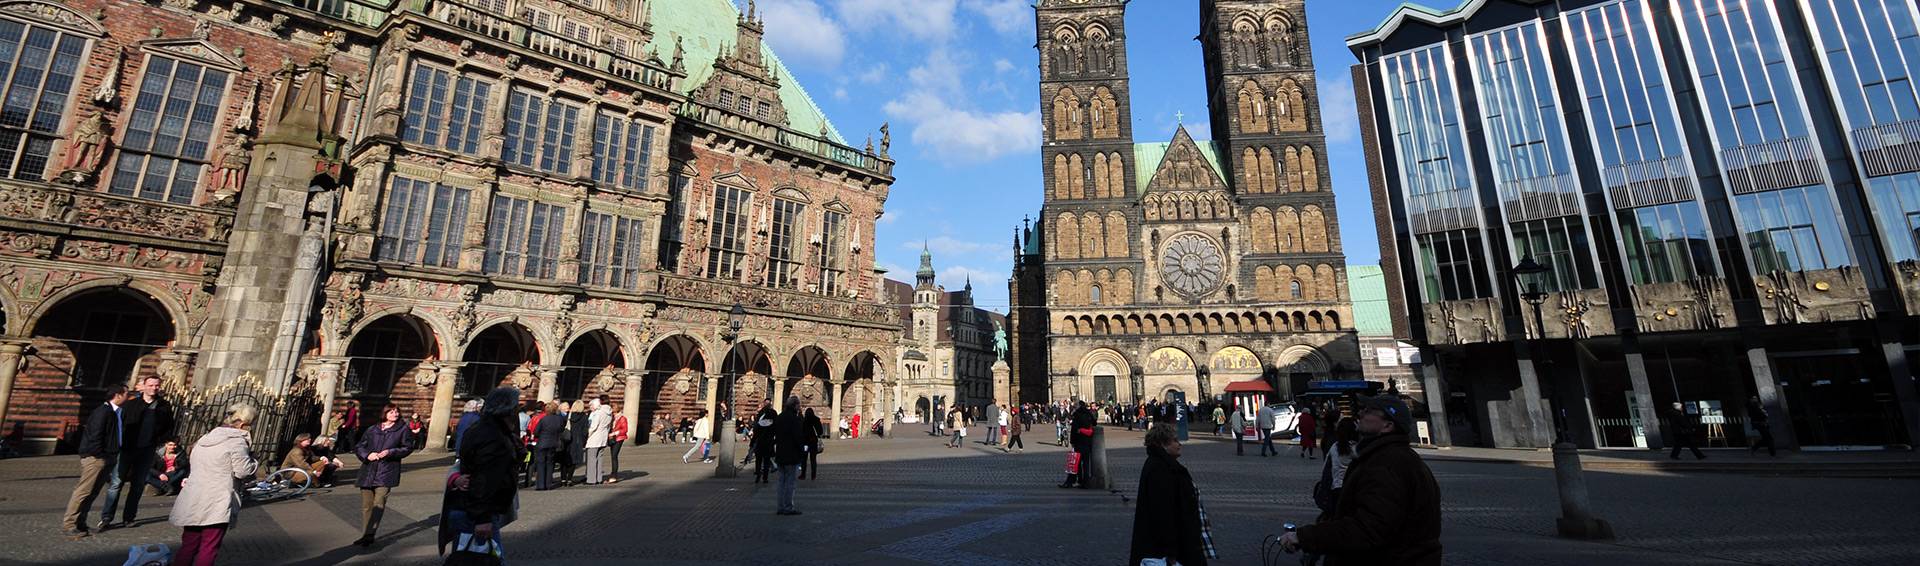 A photo of Bremen, Germany taken by UCM faculty